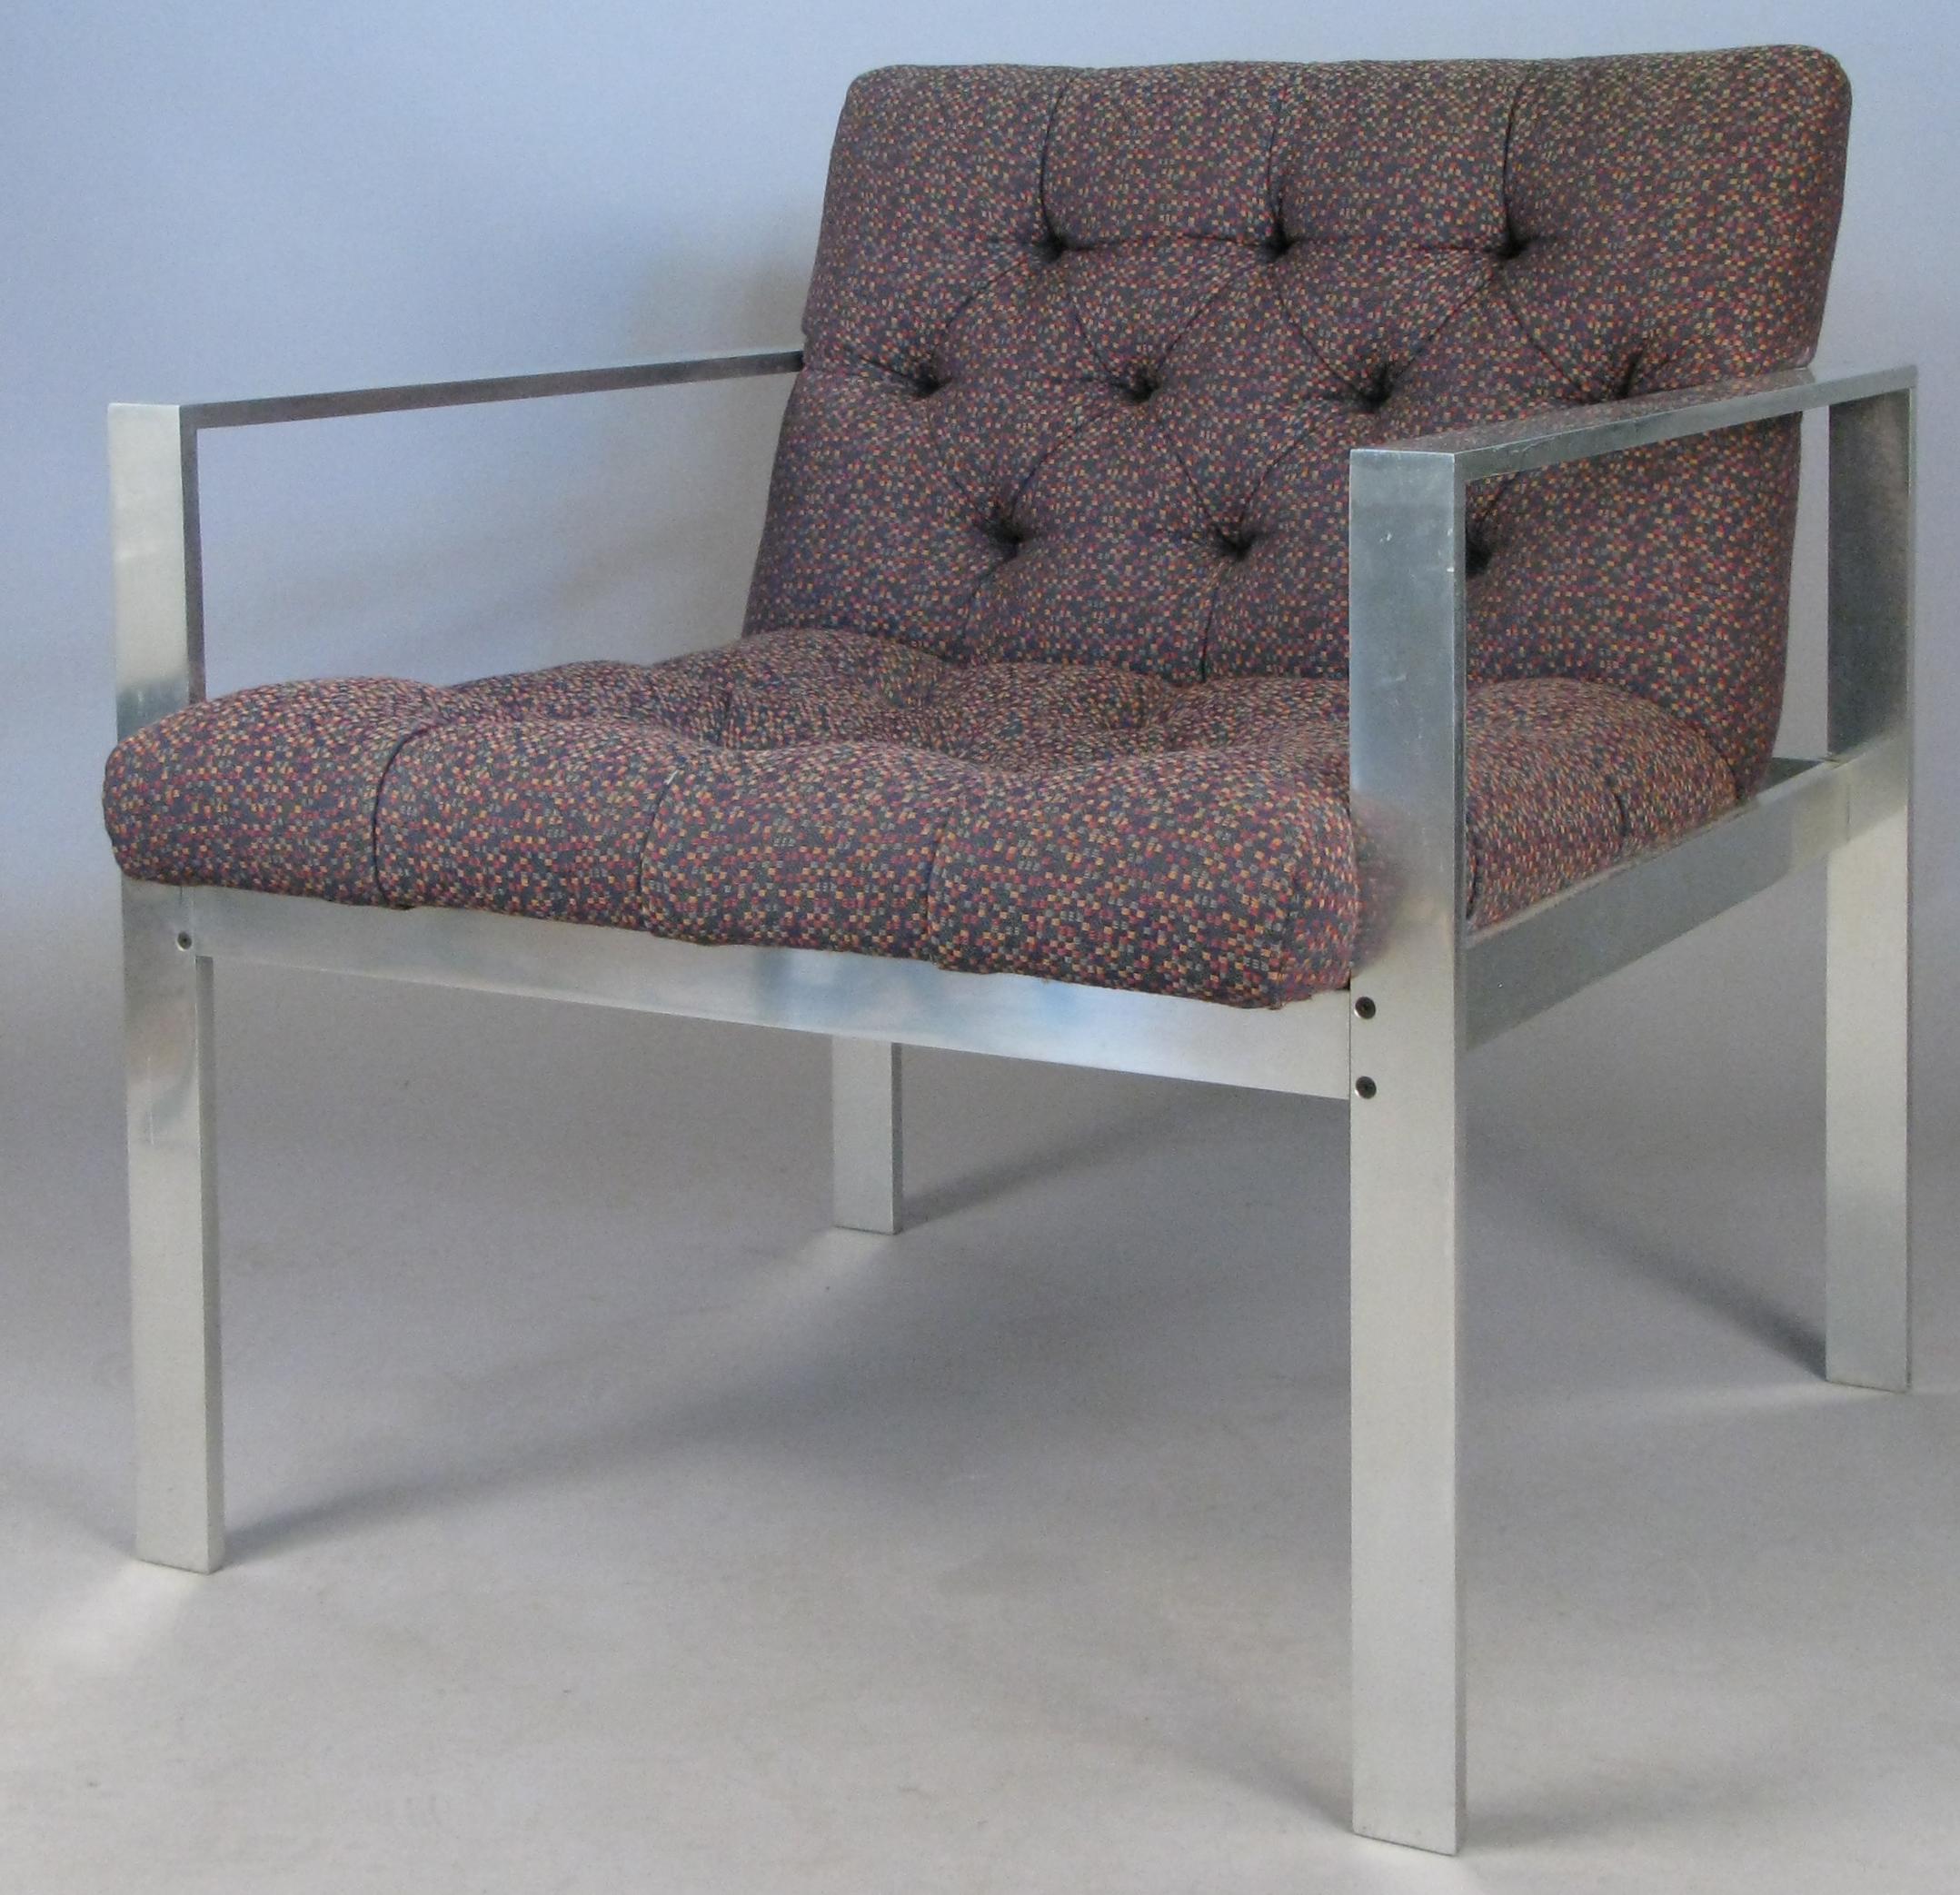 A pair of Classic modern aluminum frame lounge chairs, with diamond tufted upholstery, designed by Harvey Probber, circa 1960. Original upholstery.